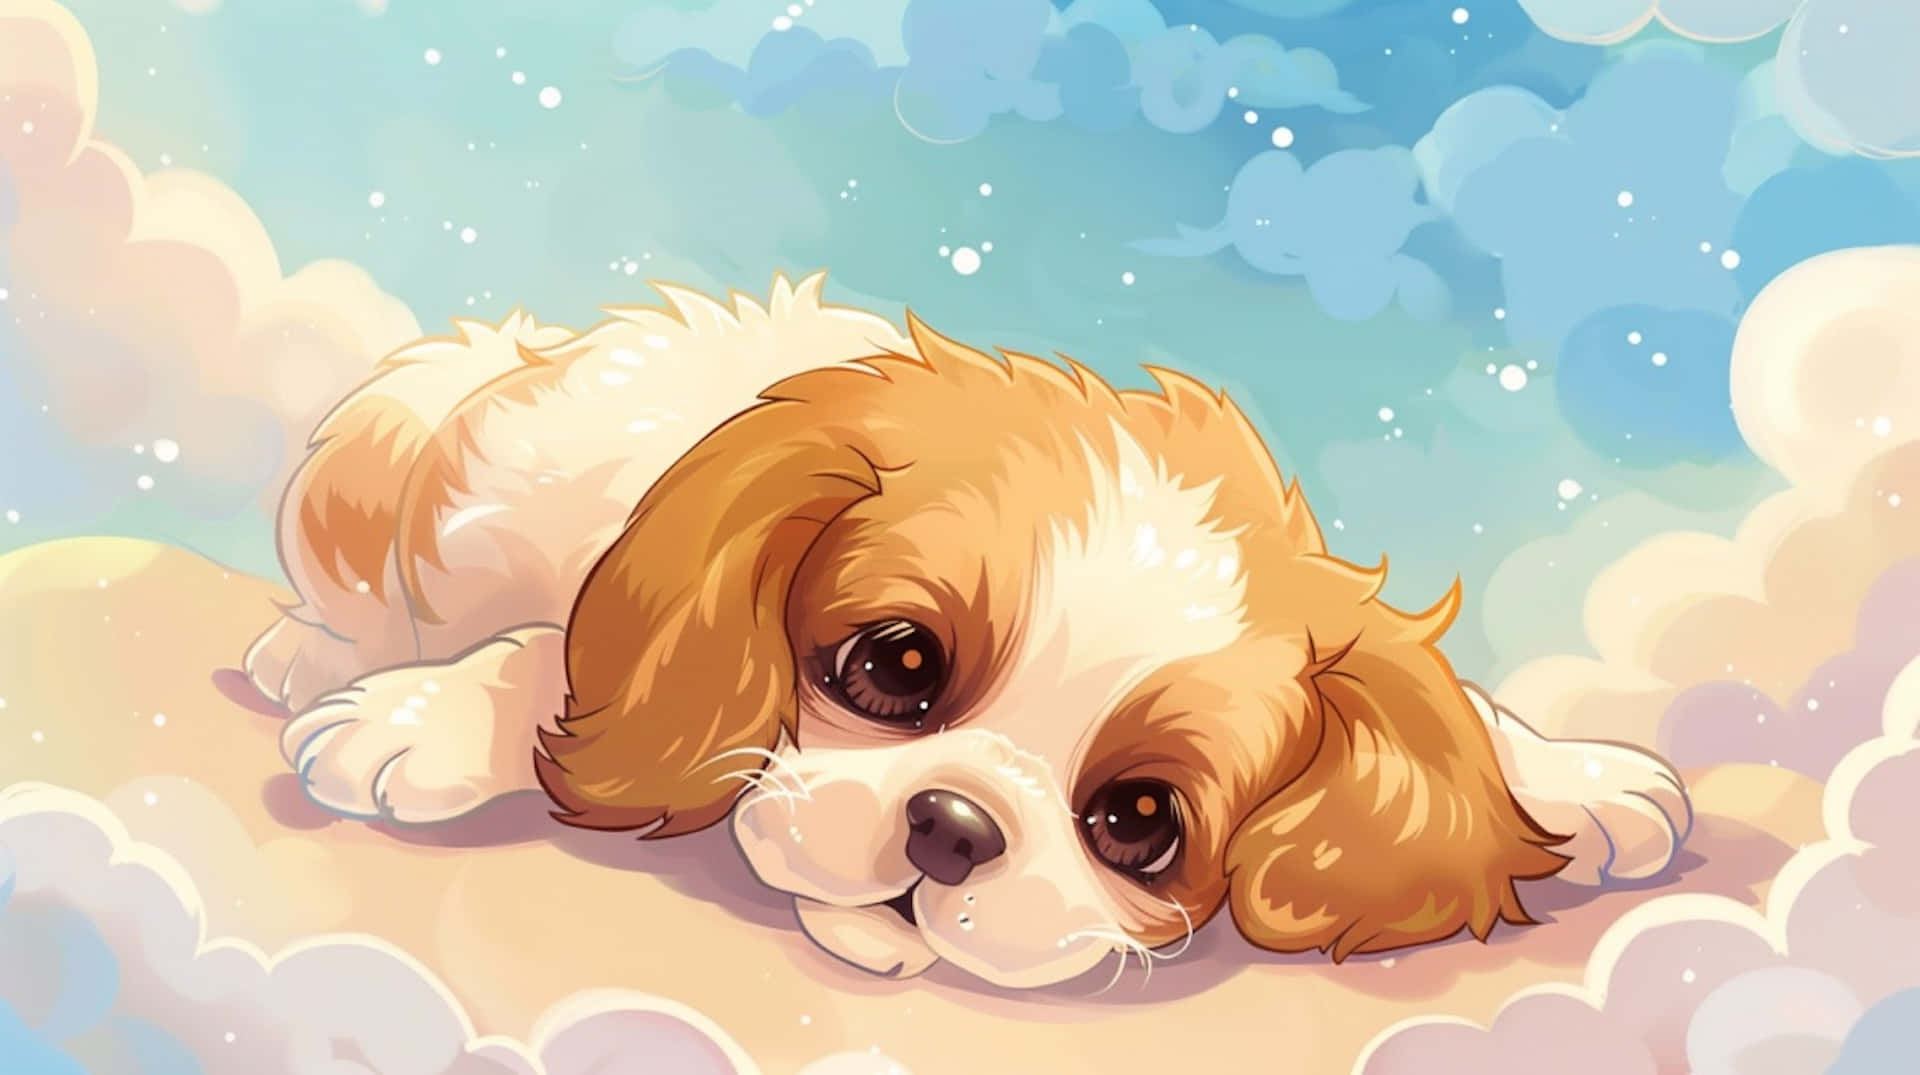 Adorable_ Anime_ Puppy_ Clouds_ Background.jpg Wallpaper